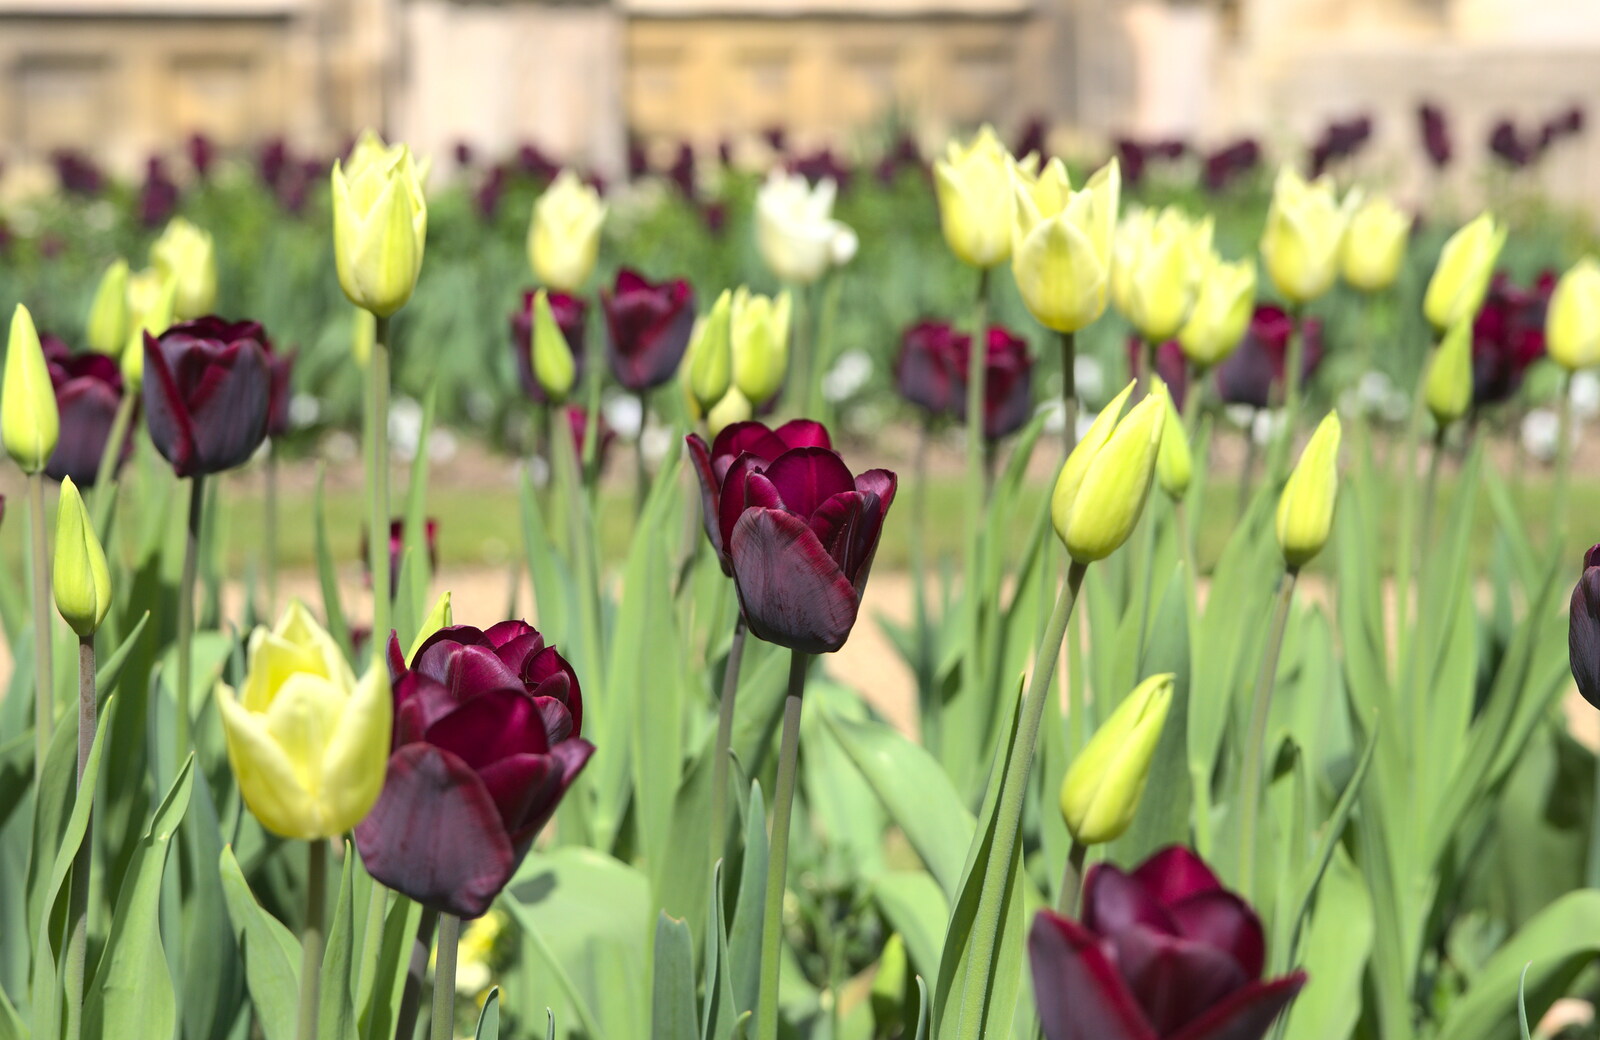 Spectacular tulips are in full bloom from A Trip to Audley End House, Saffron Walden, Essex - 16th April 2014